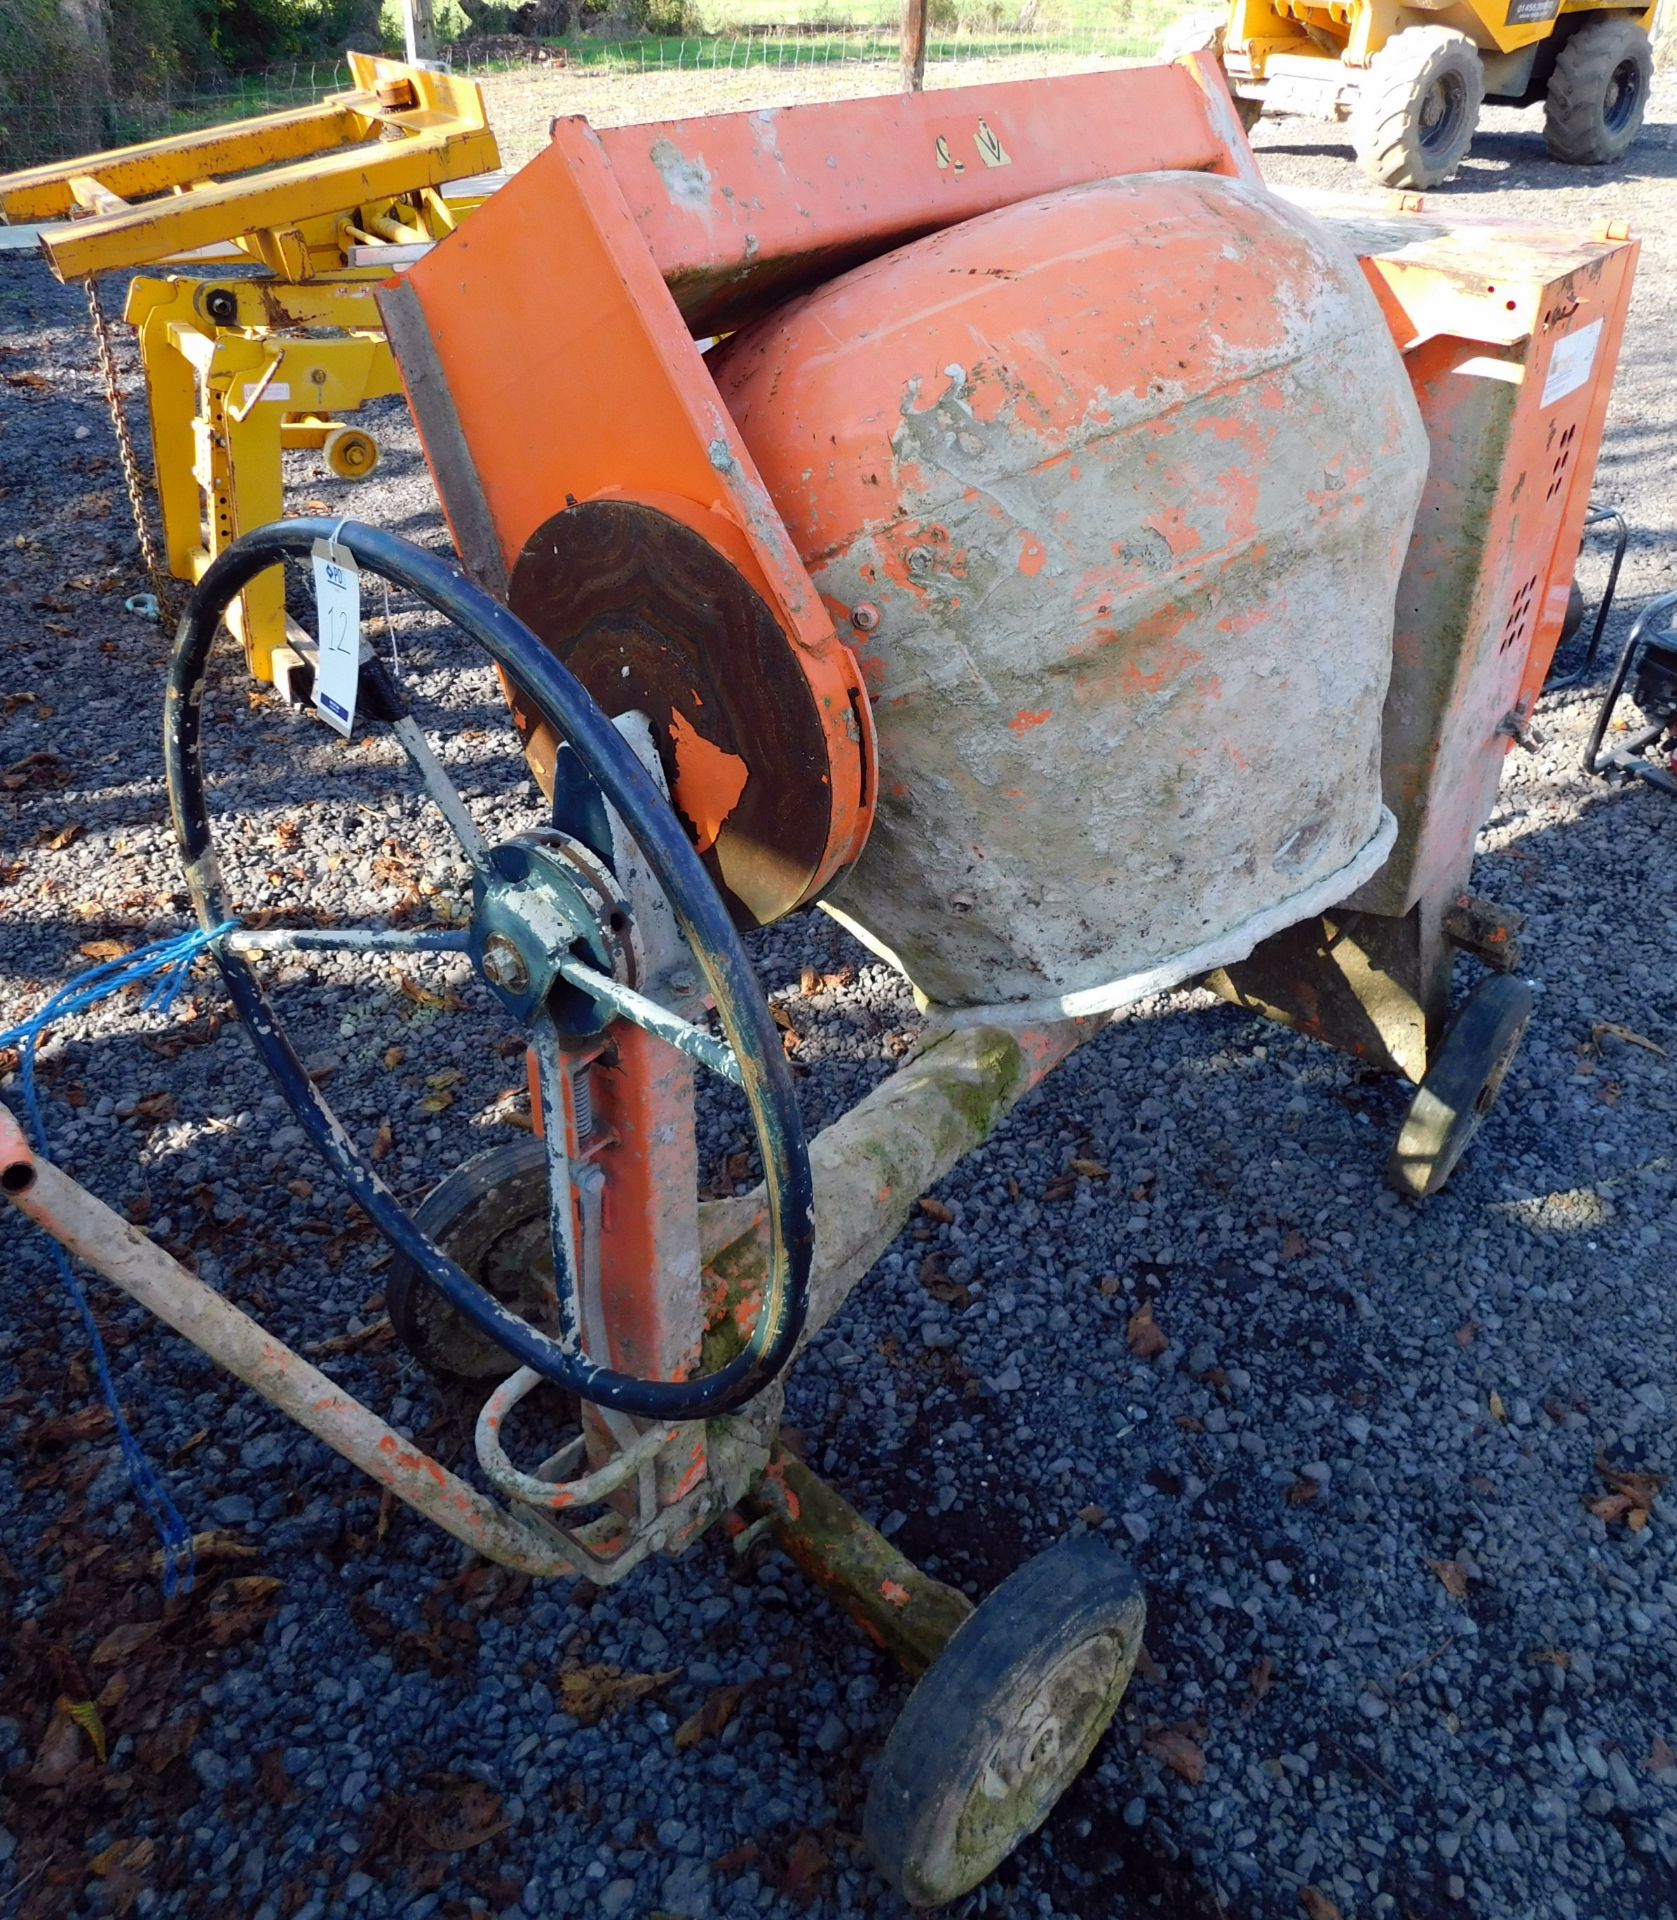 Belle PM20 100XT cement mixer (2008) (Located Milton Keynes, Viewing by Appointment – see General - Image 4 of 7